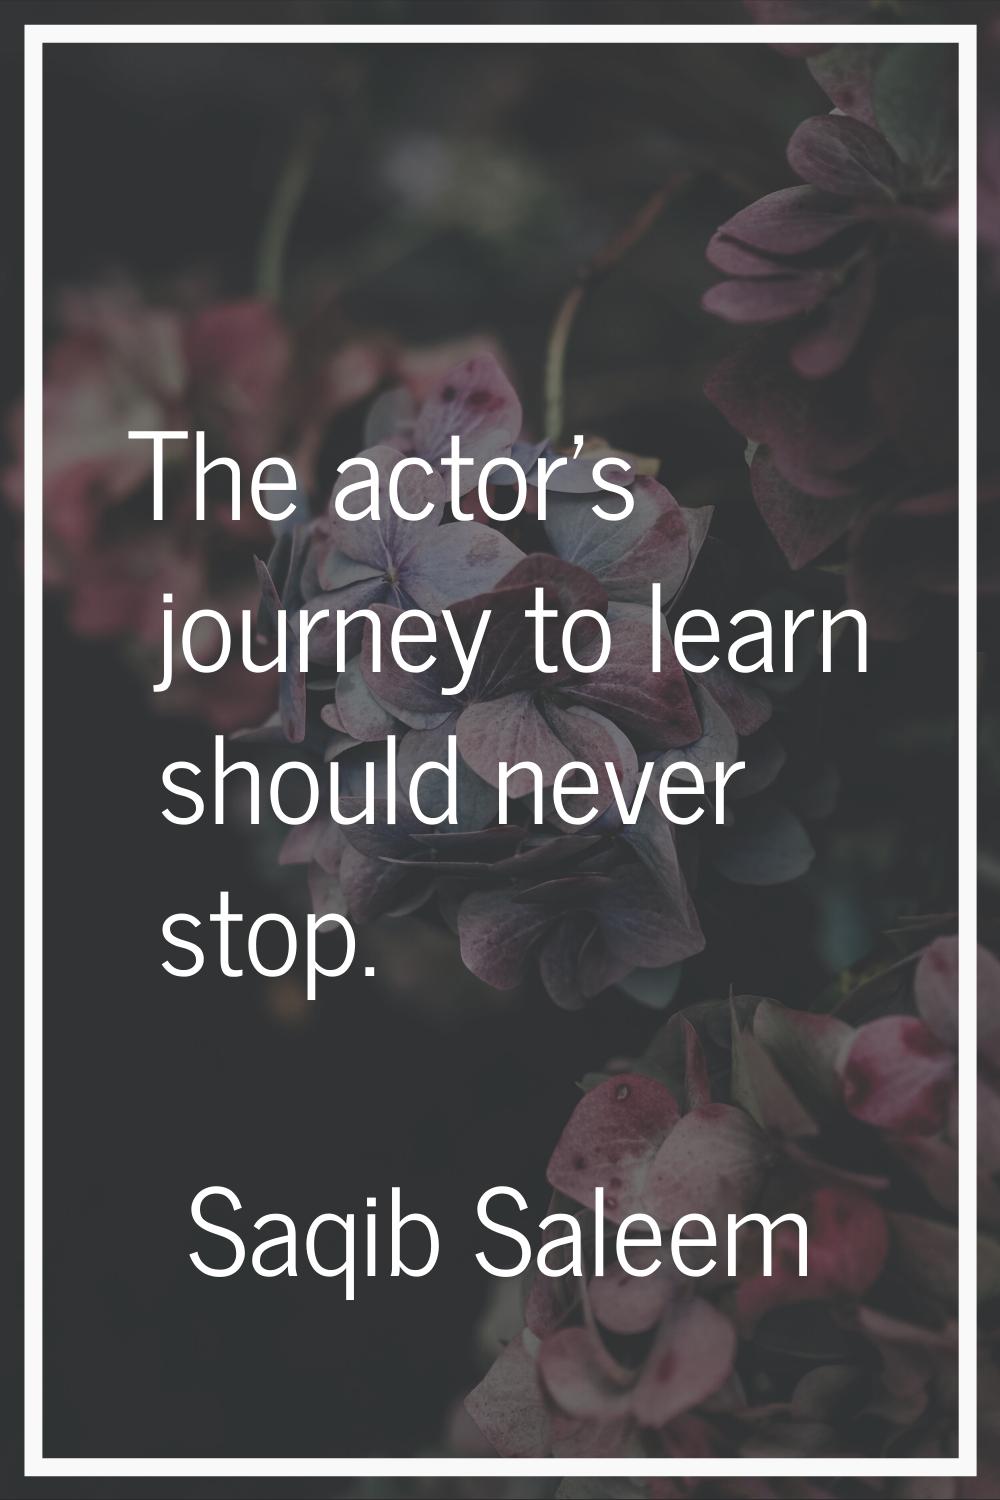 The actor's journey to learn should never stop.